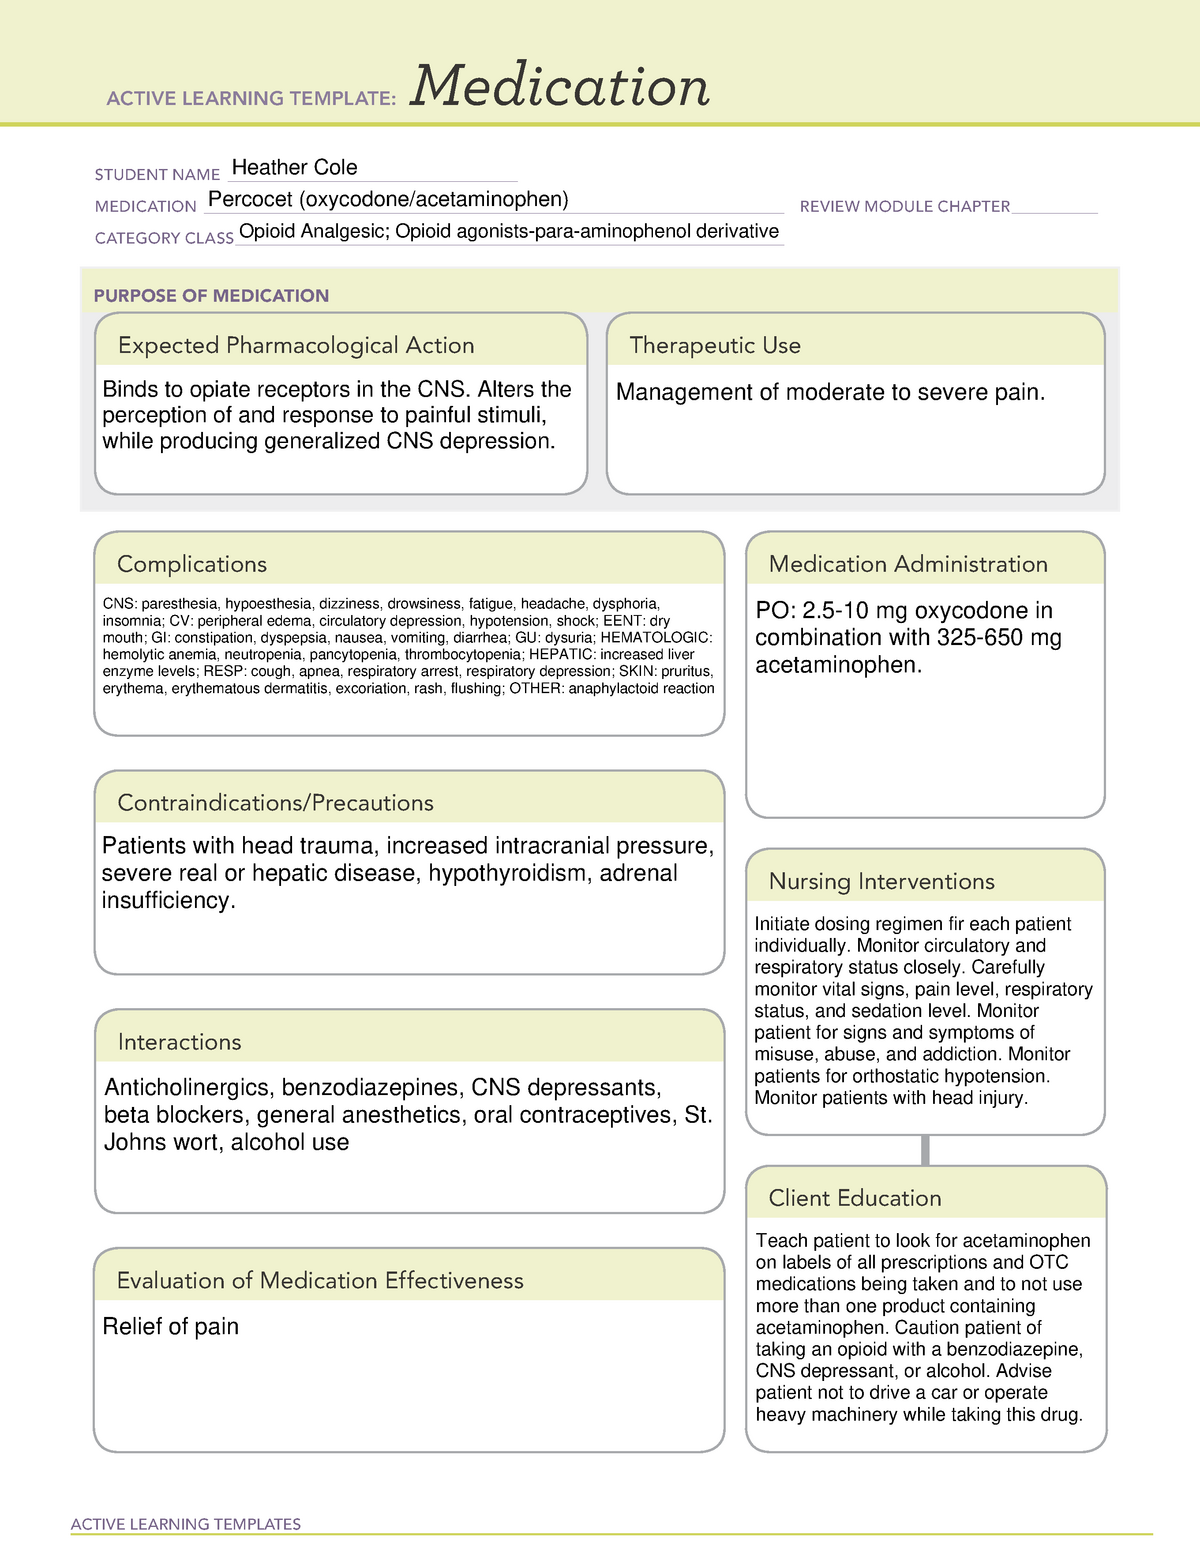 percocet-drug-cards-active-learning-templates-medication-student